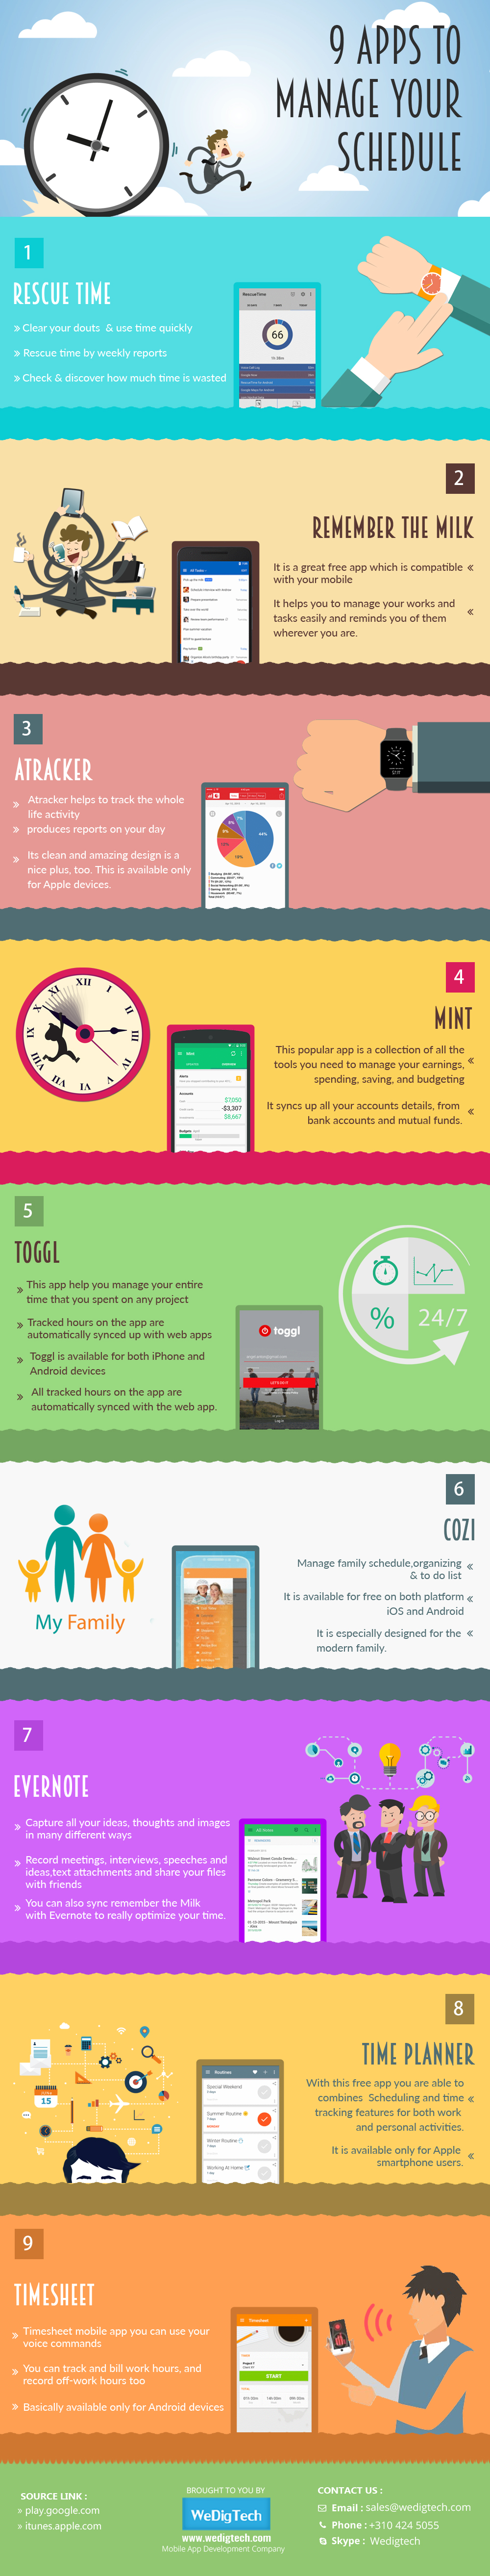 9 Apps Manage Schedule - Time Scheduling App InfoGraphics